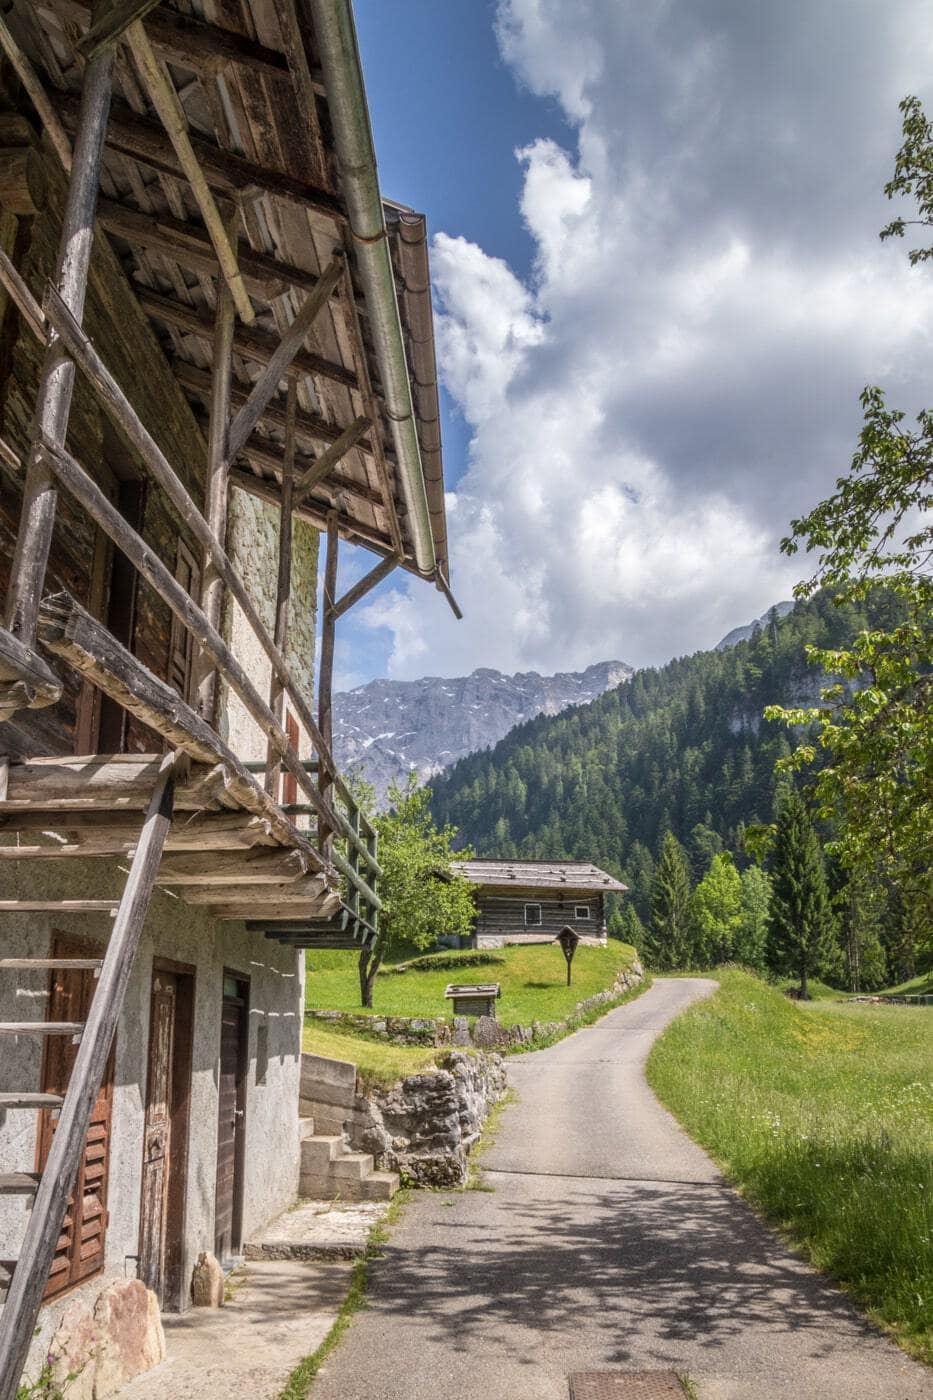 scenery in the Trentino area with mountain huts surrounded by the Dolomites